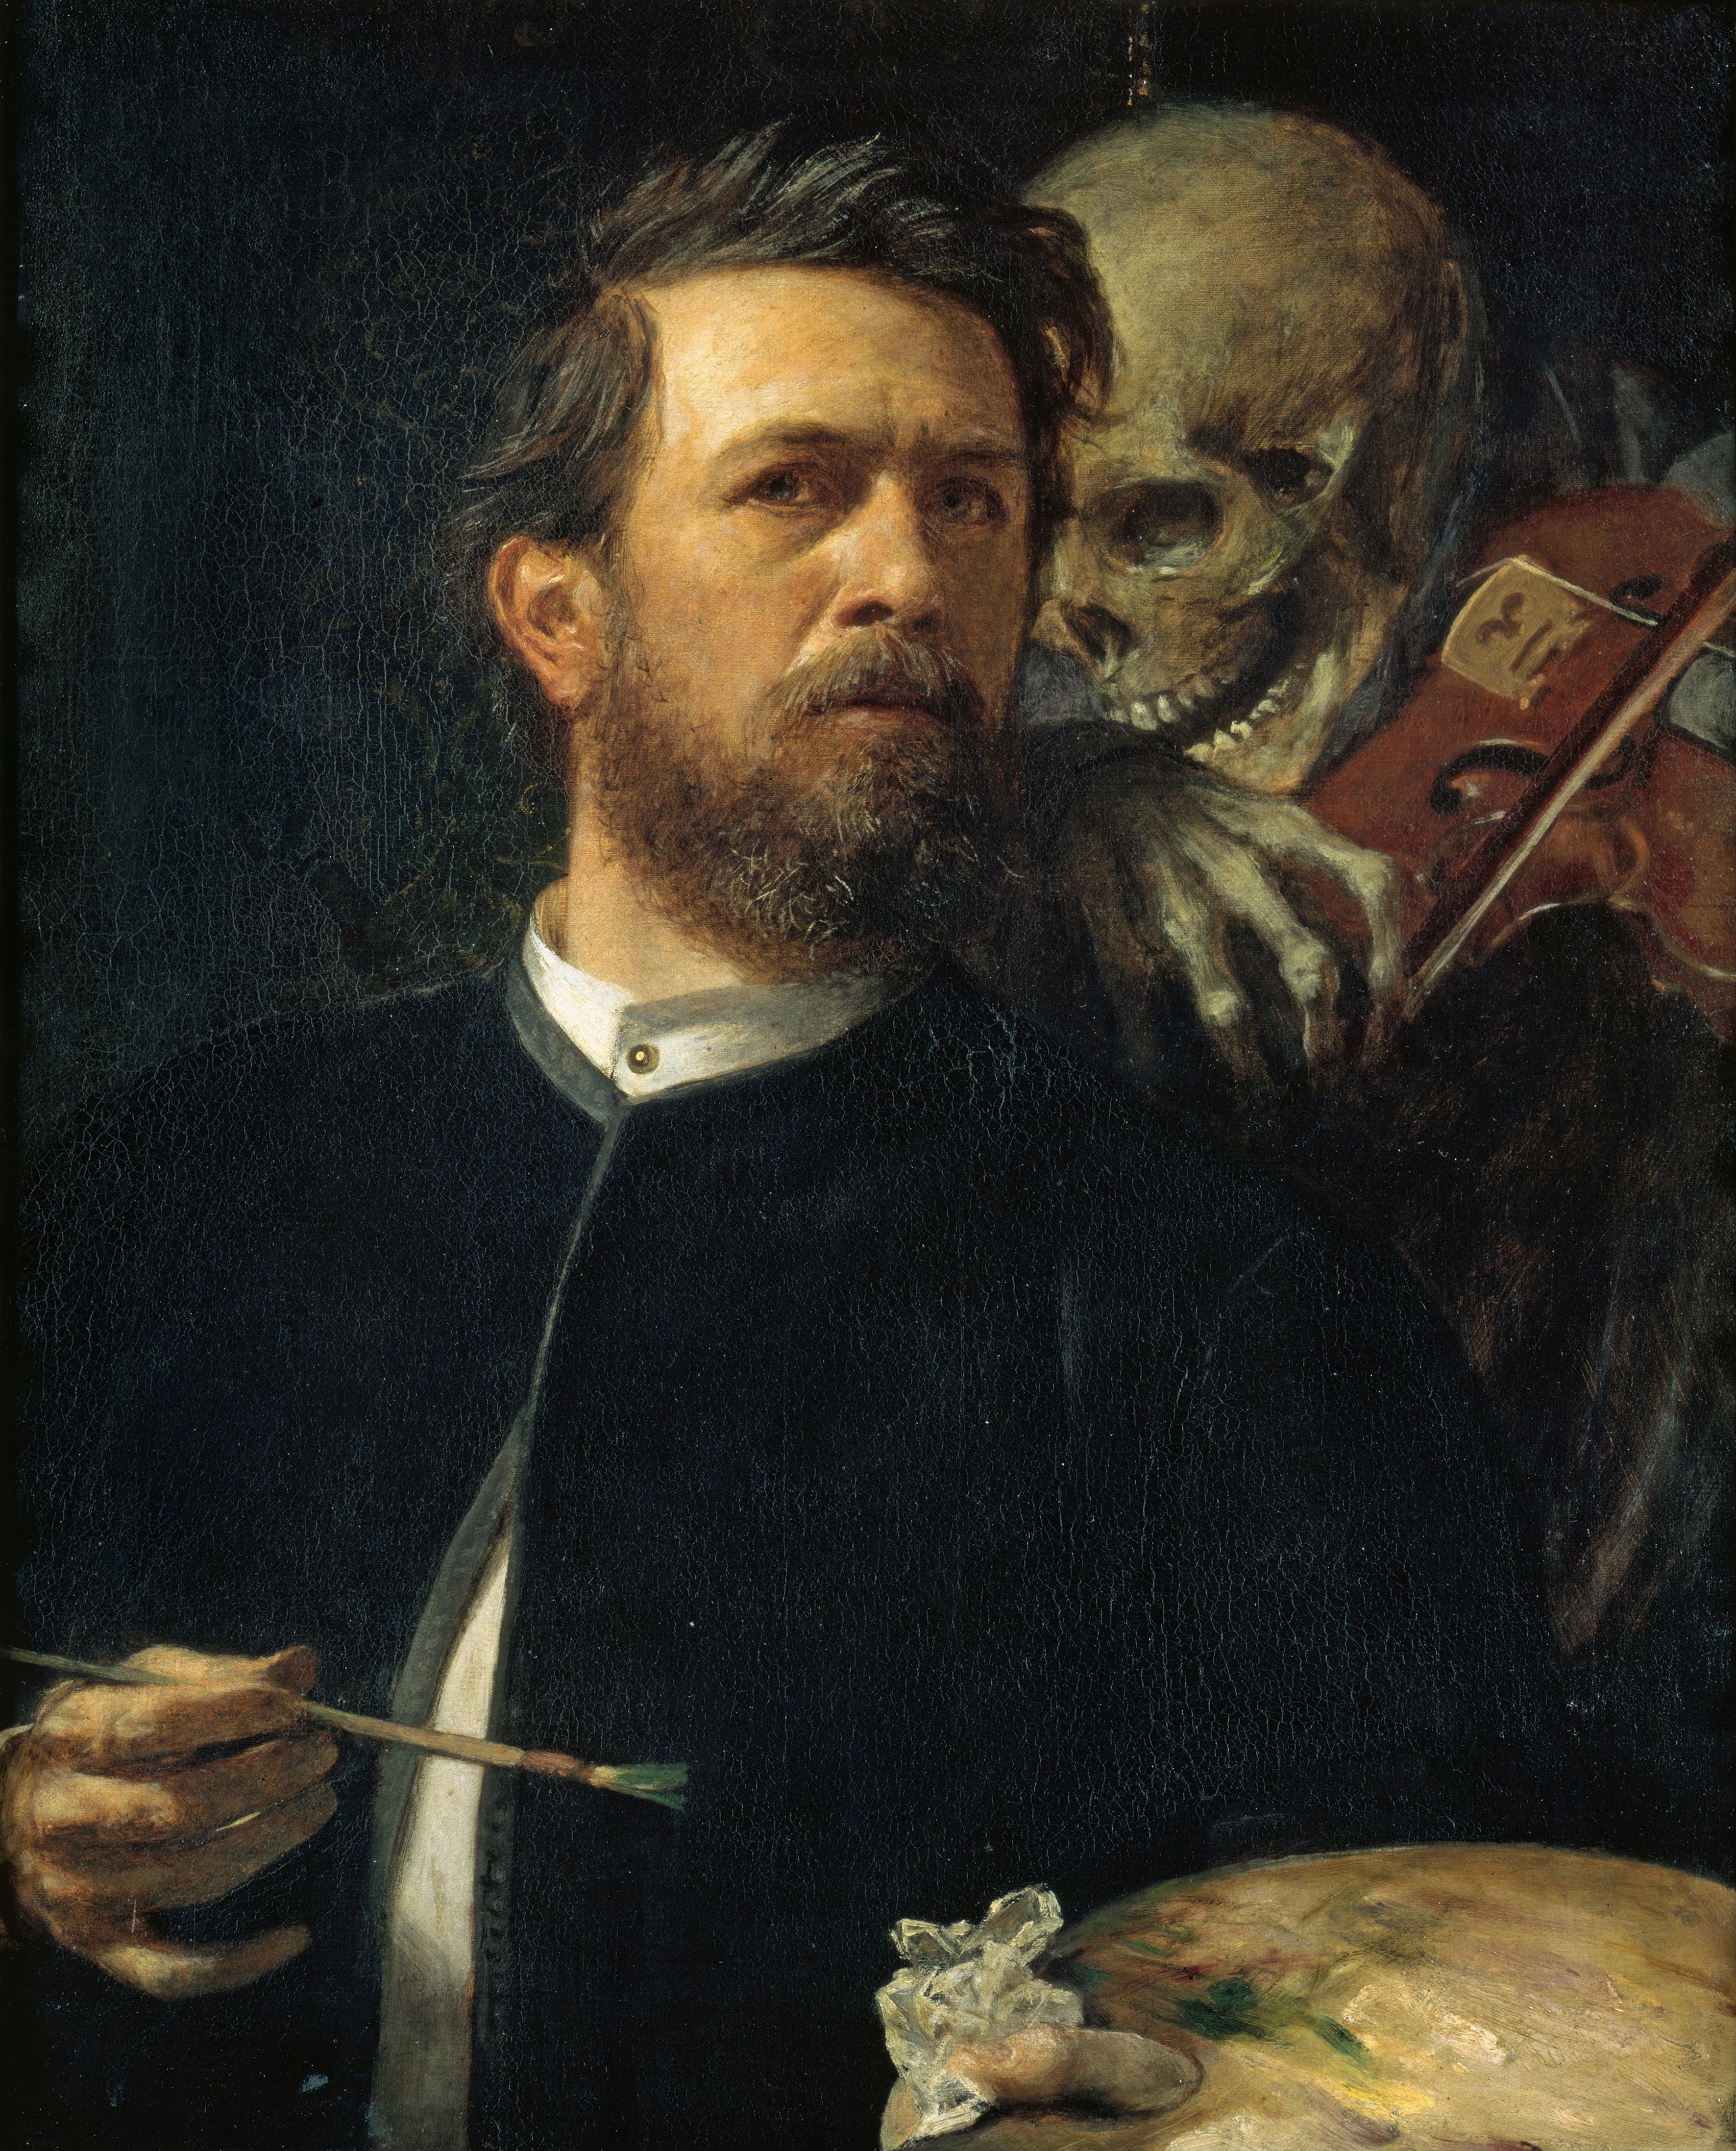 Self-Portrait with Death playing the Fiddle by Arnold Böcklin - 1872 - 74 x 61 cm Alte Nationalgalerie